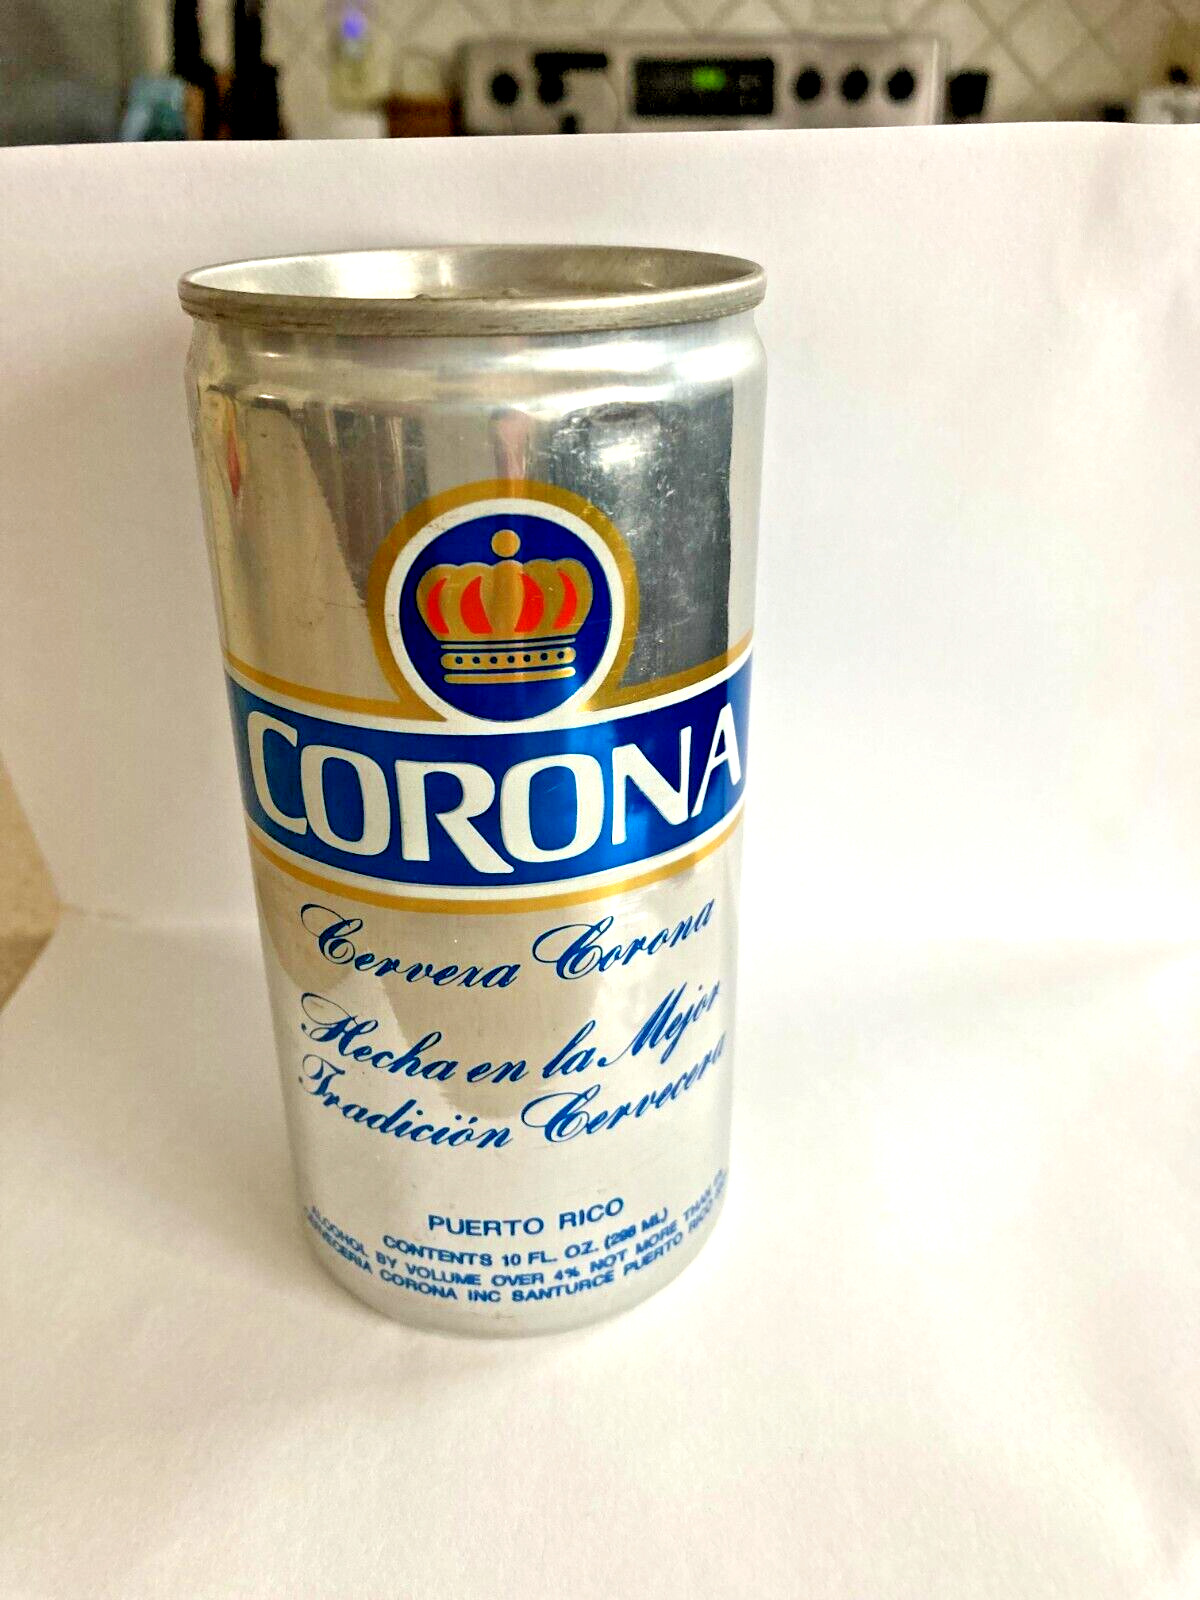 CORONA Silver Beer Can from PUERTO RICO 10 oz